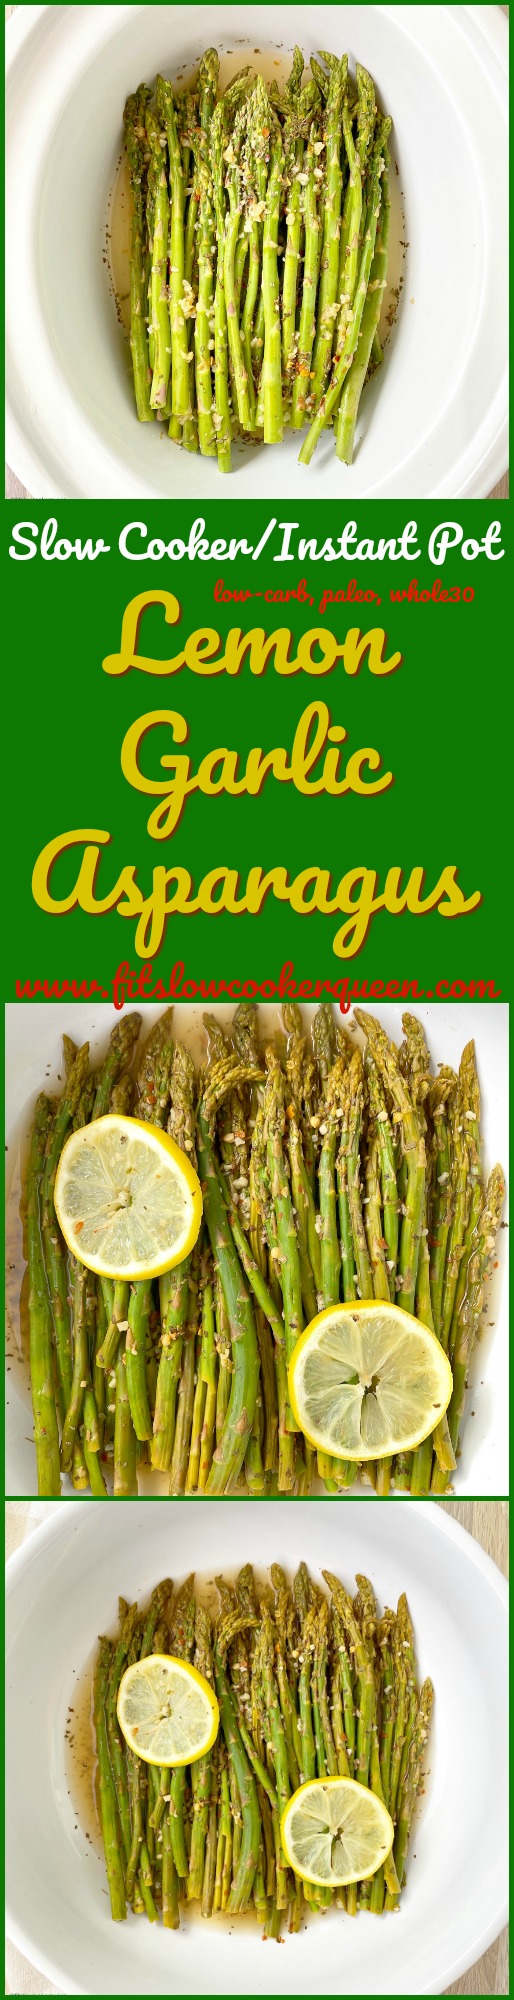 another pinterest pin for Slow Cooker_Instant Pot Lemon Garlic Asparagus (Low-Carb, Paleo, Whole30)